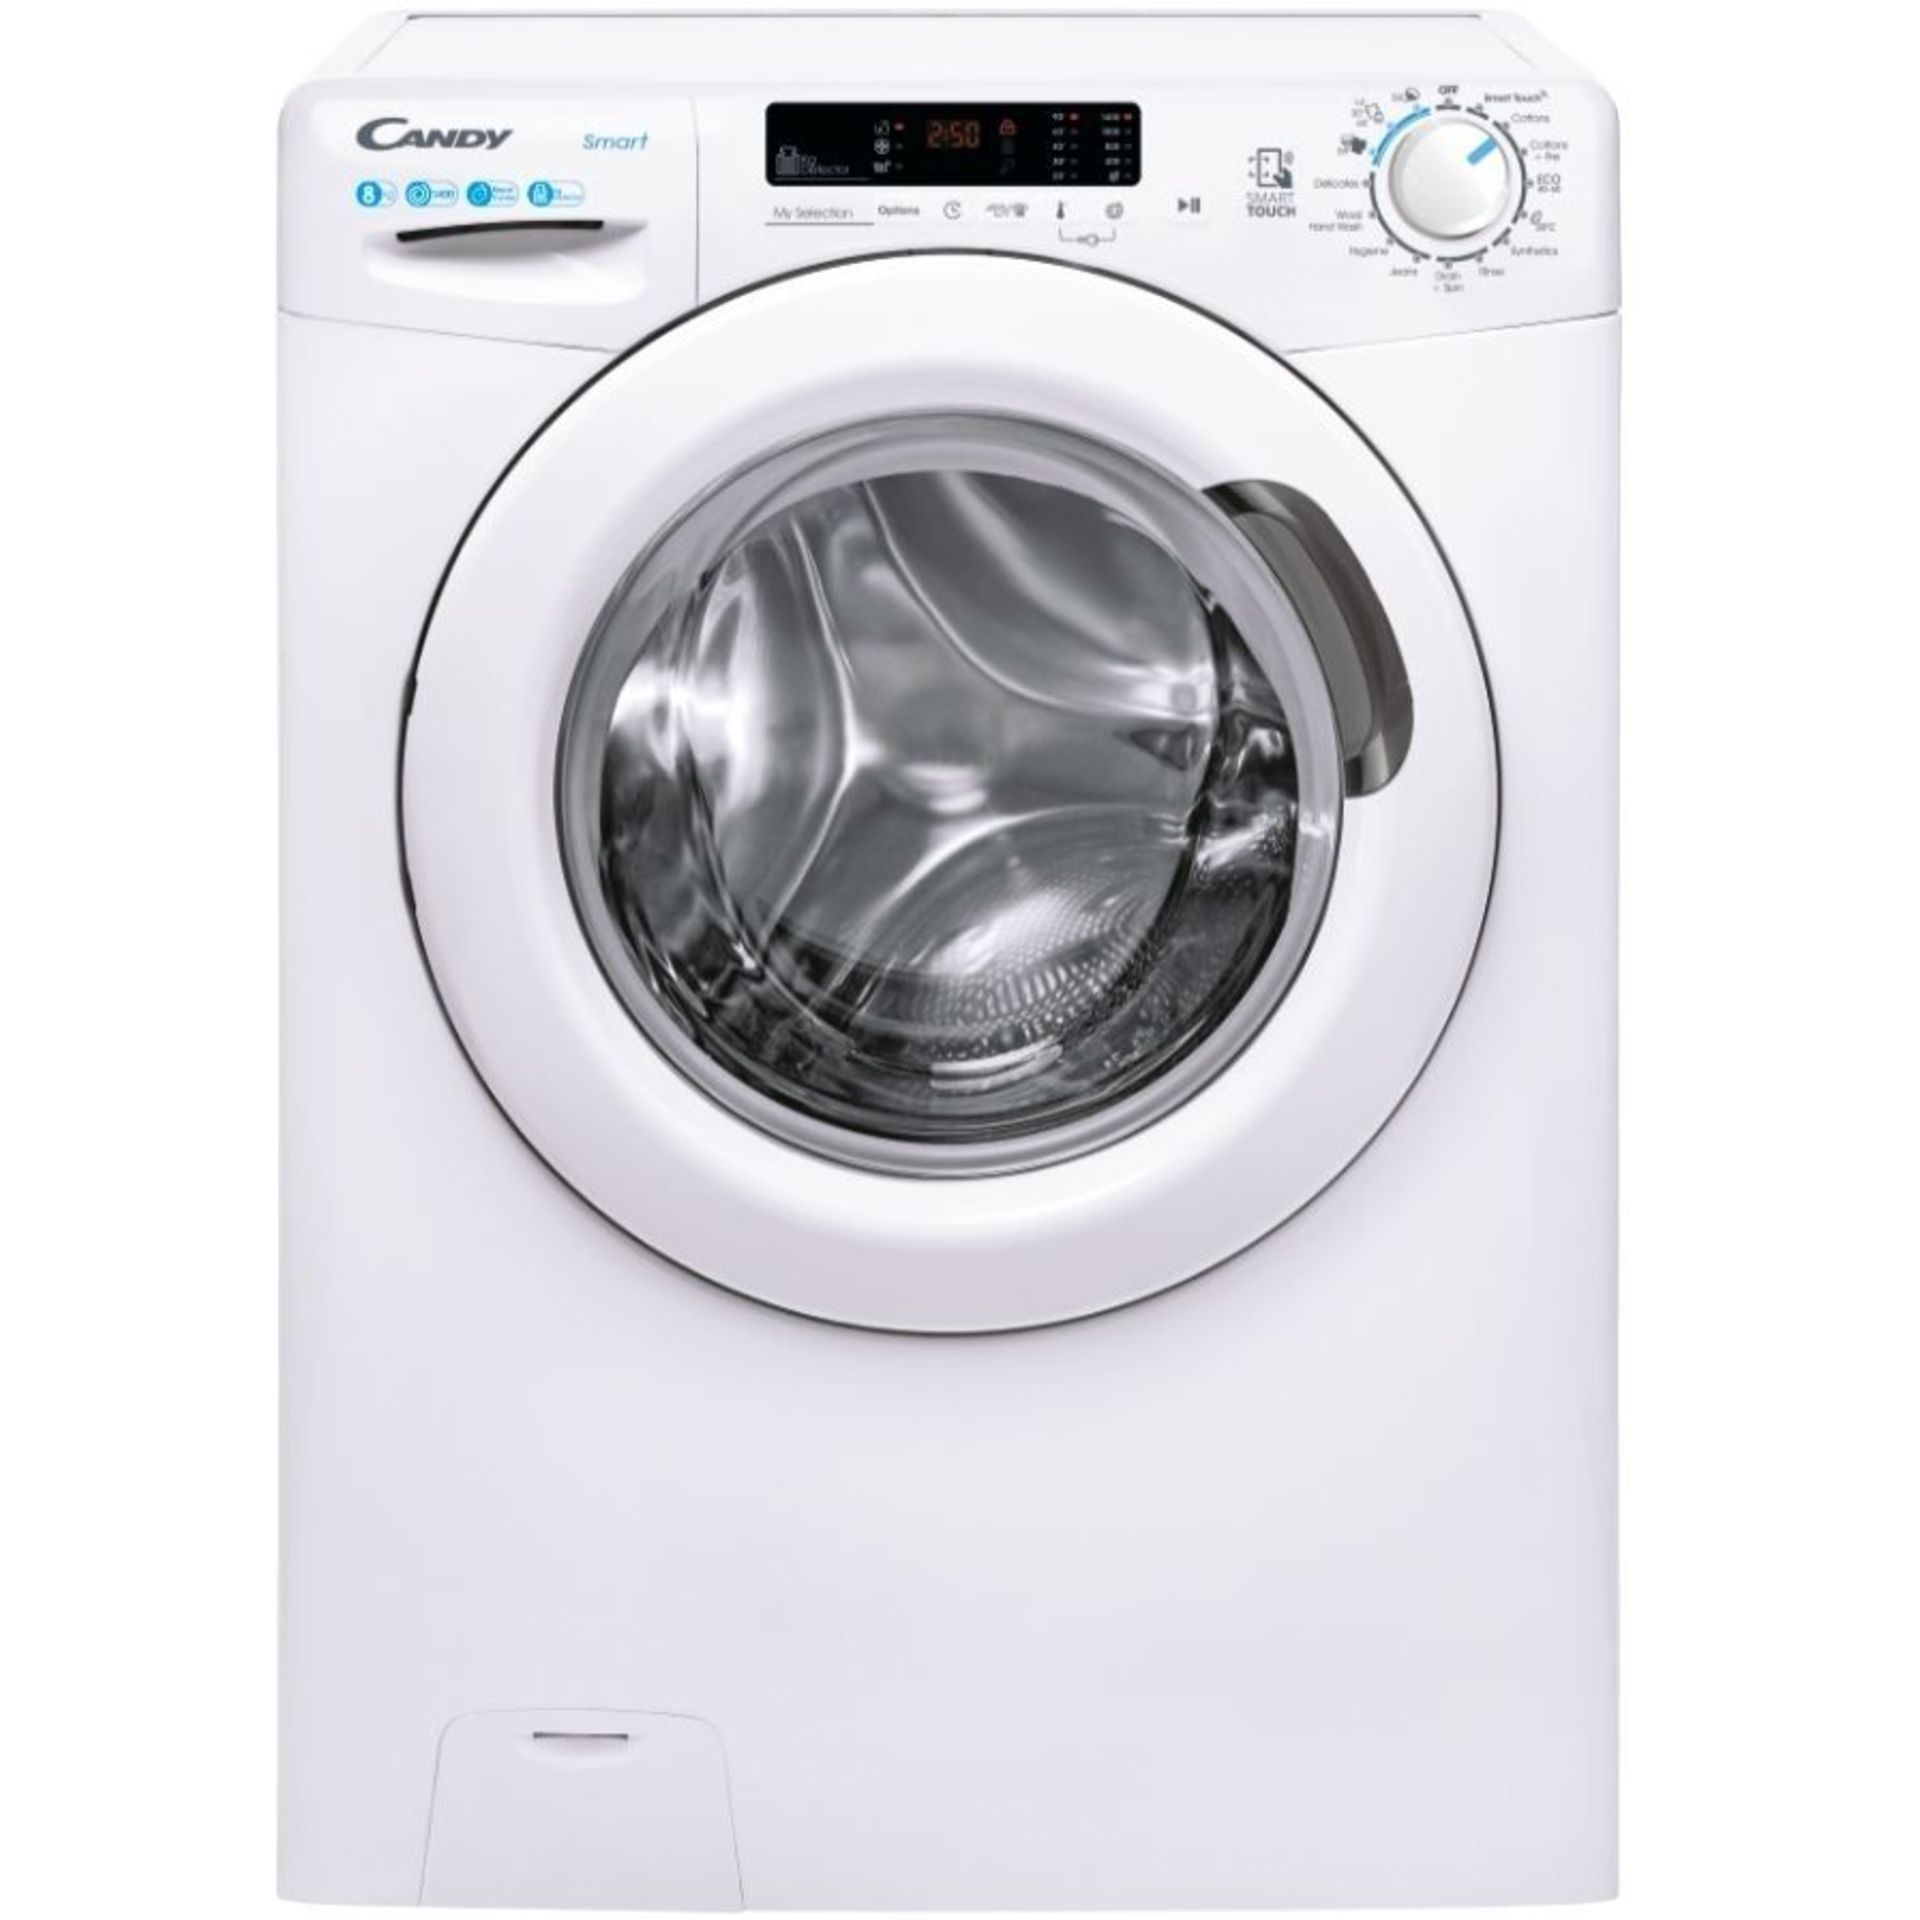 Candy CS 1482DE Washing Machine, 8kg, 1400 Spin, White. - S2. RRP £419.00. Let Candy help your day - Image 2 of 2